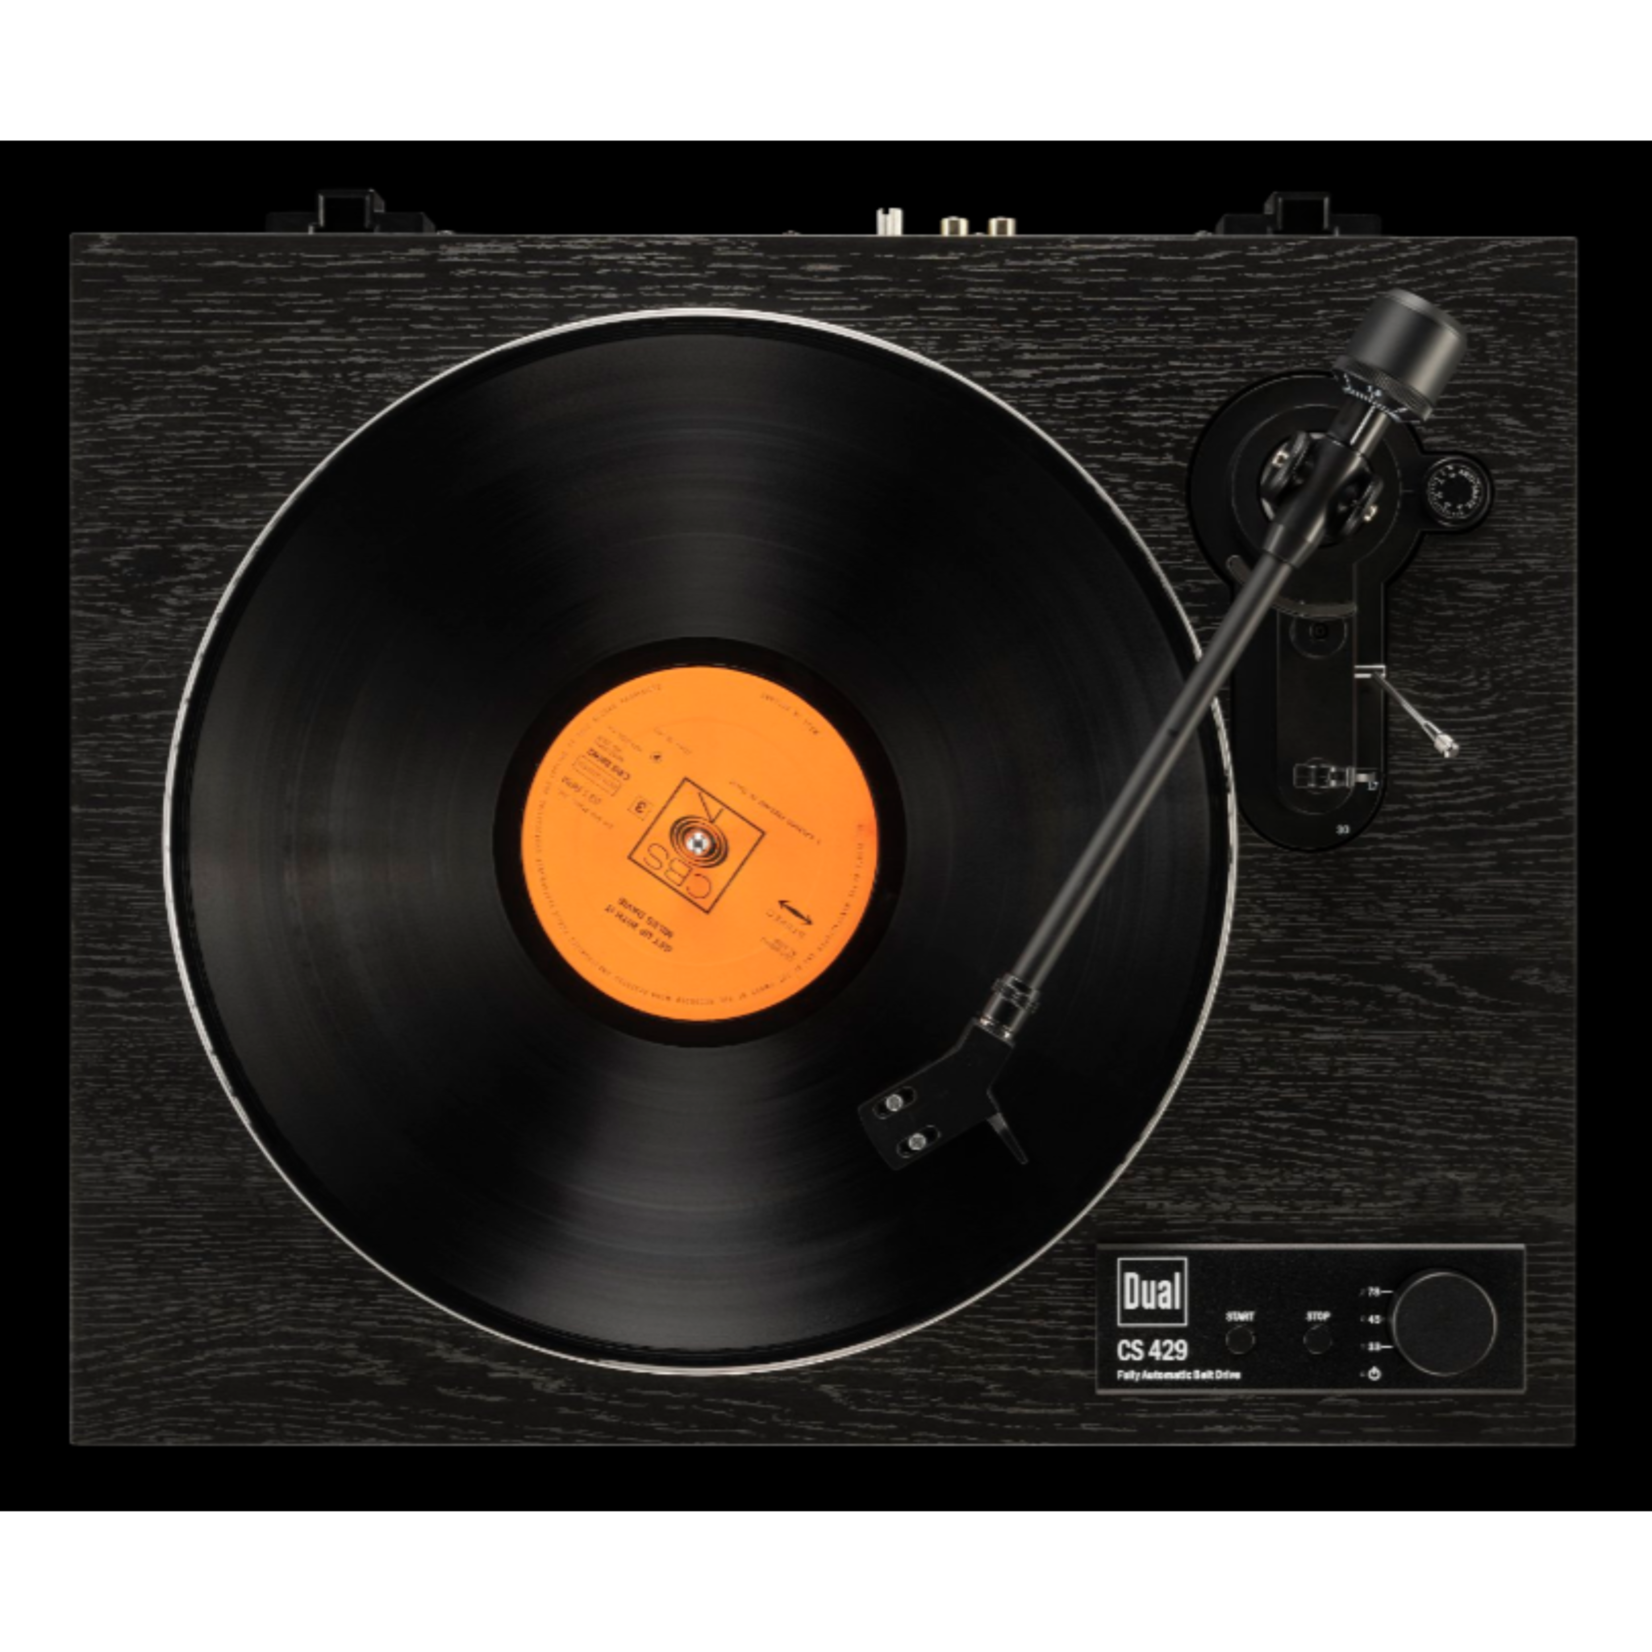 Dual Dual CS429 Fully Automatic Turntable